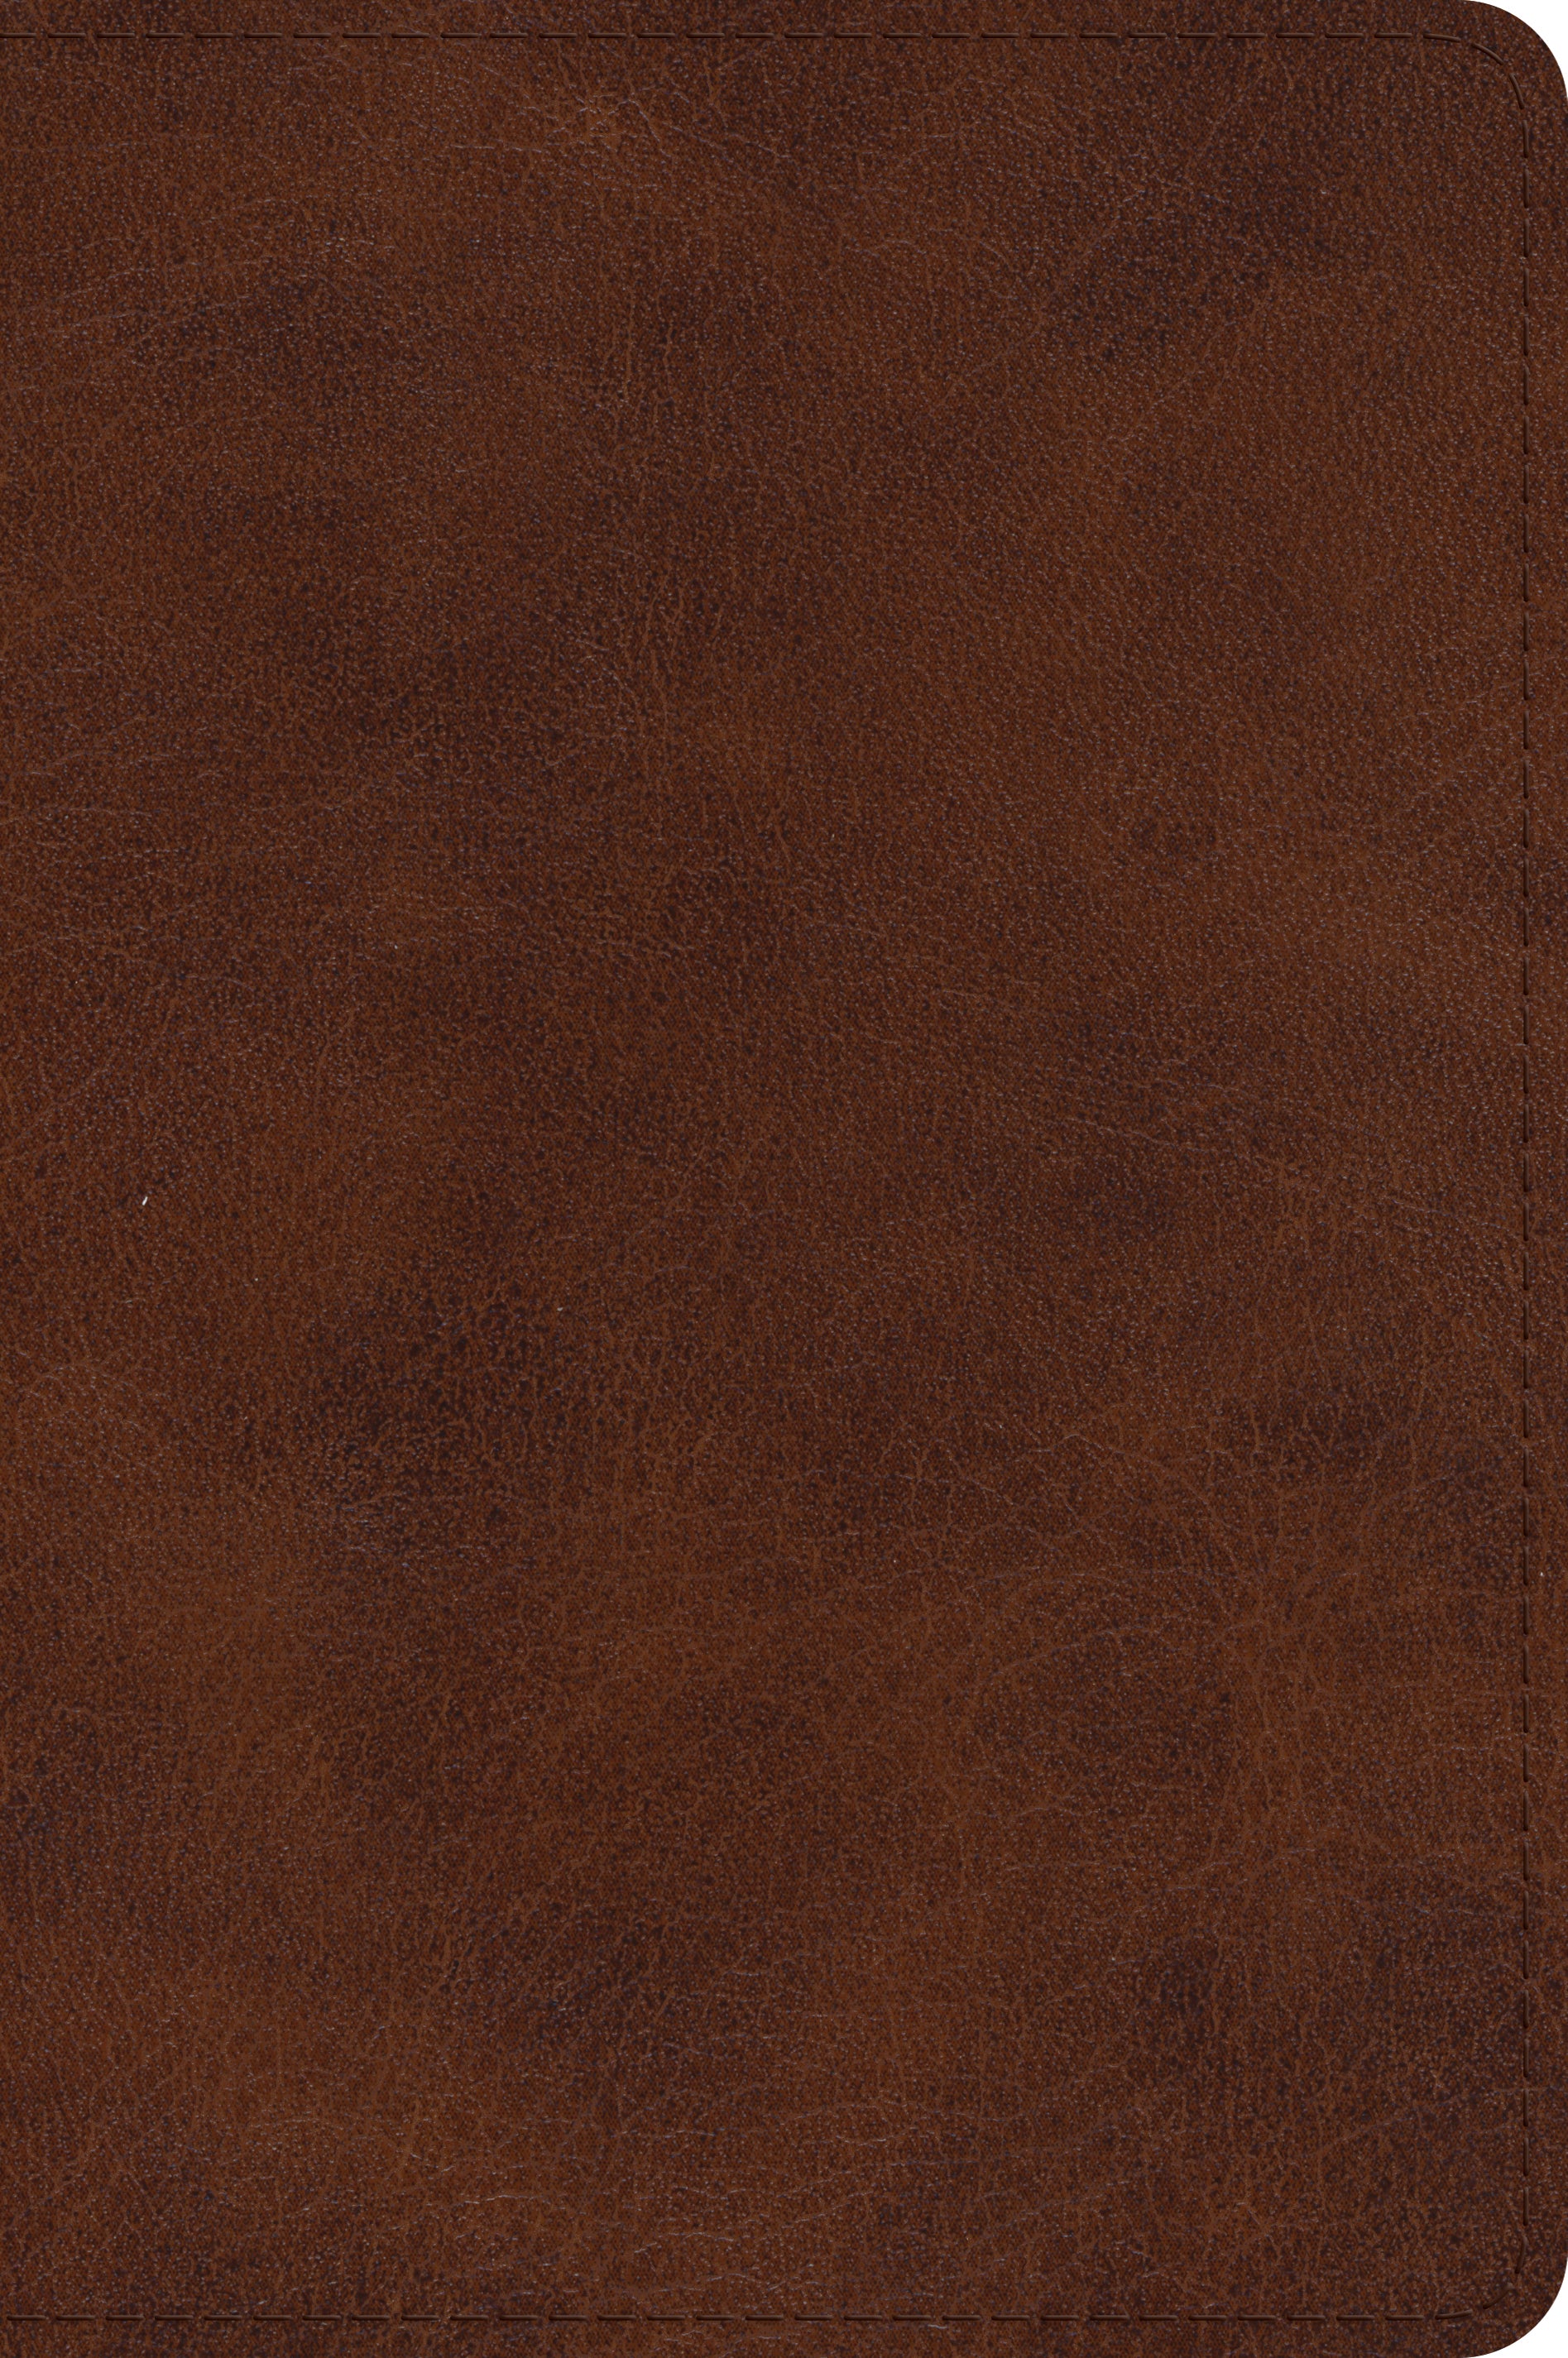 Image of ESV Large Print Bible (TruTone, Deep Brown) other